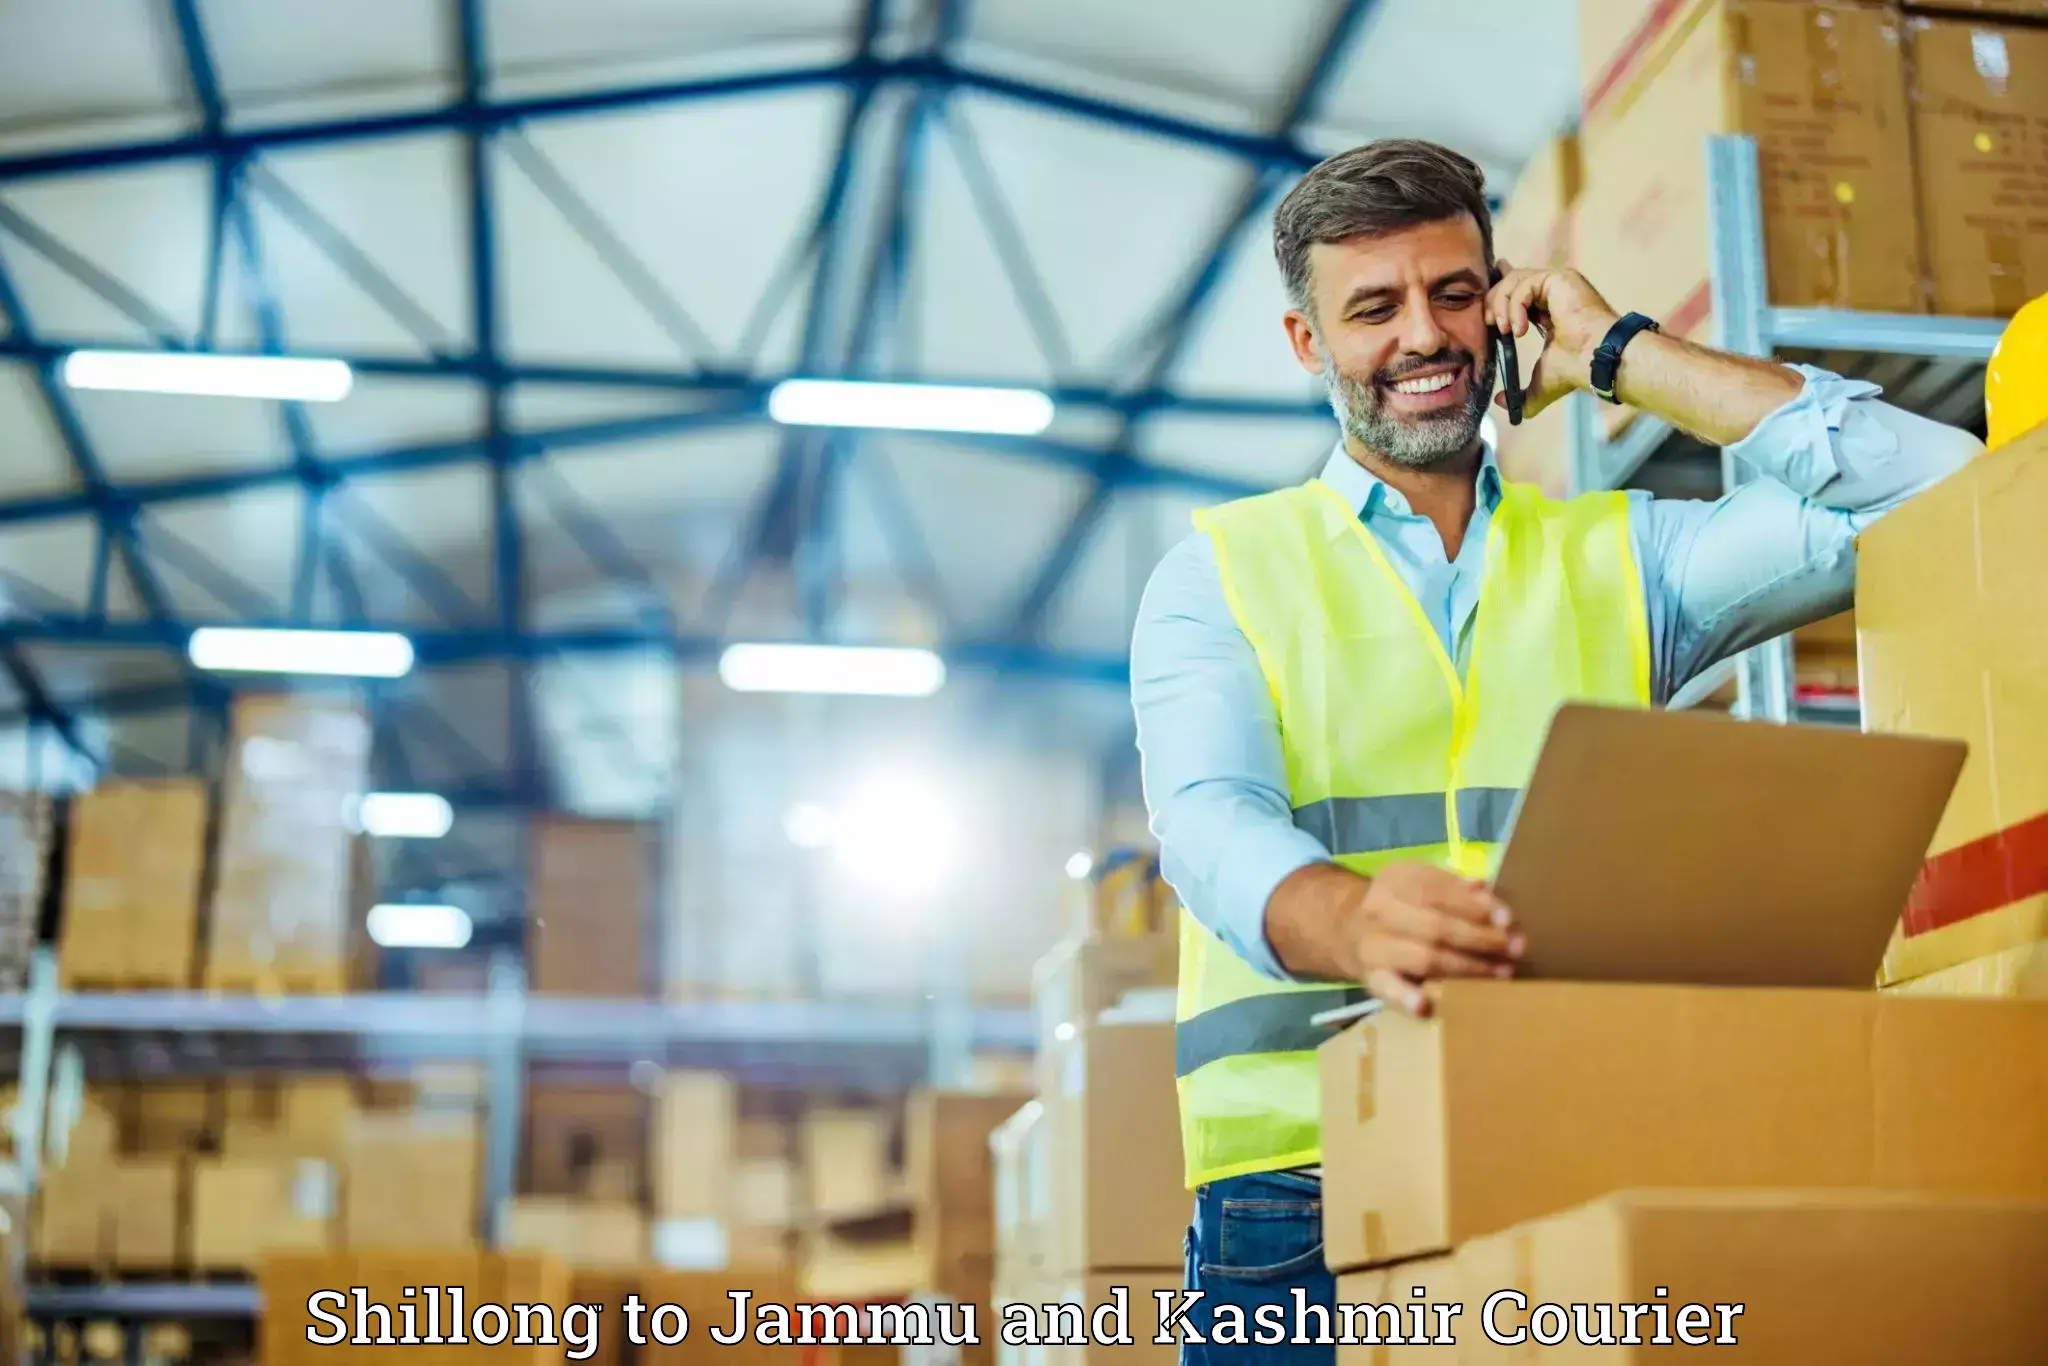 Furniture moving experts Shillong to Jammu and Kashmir